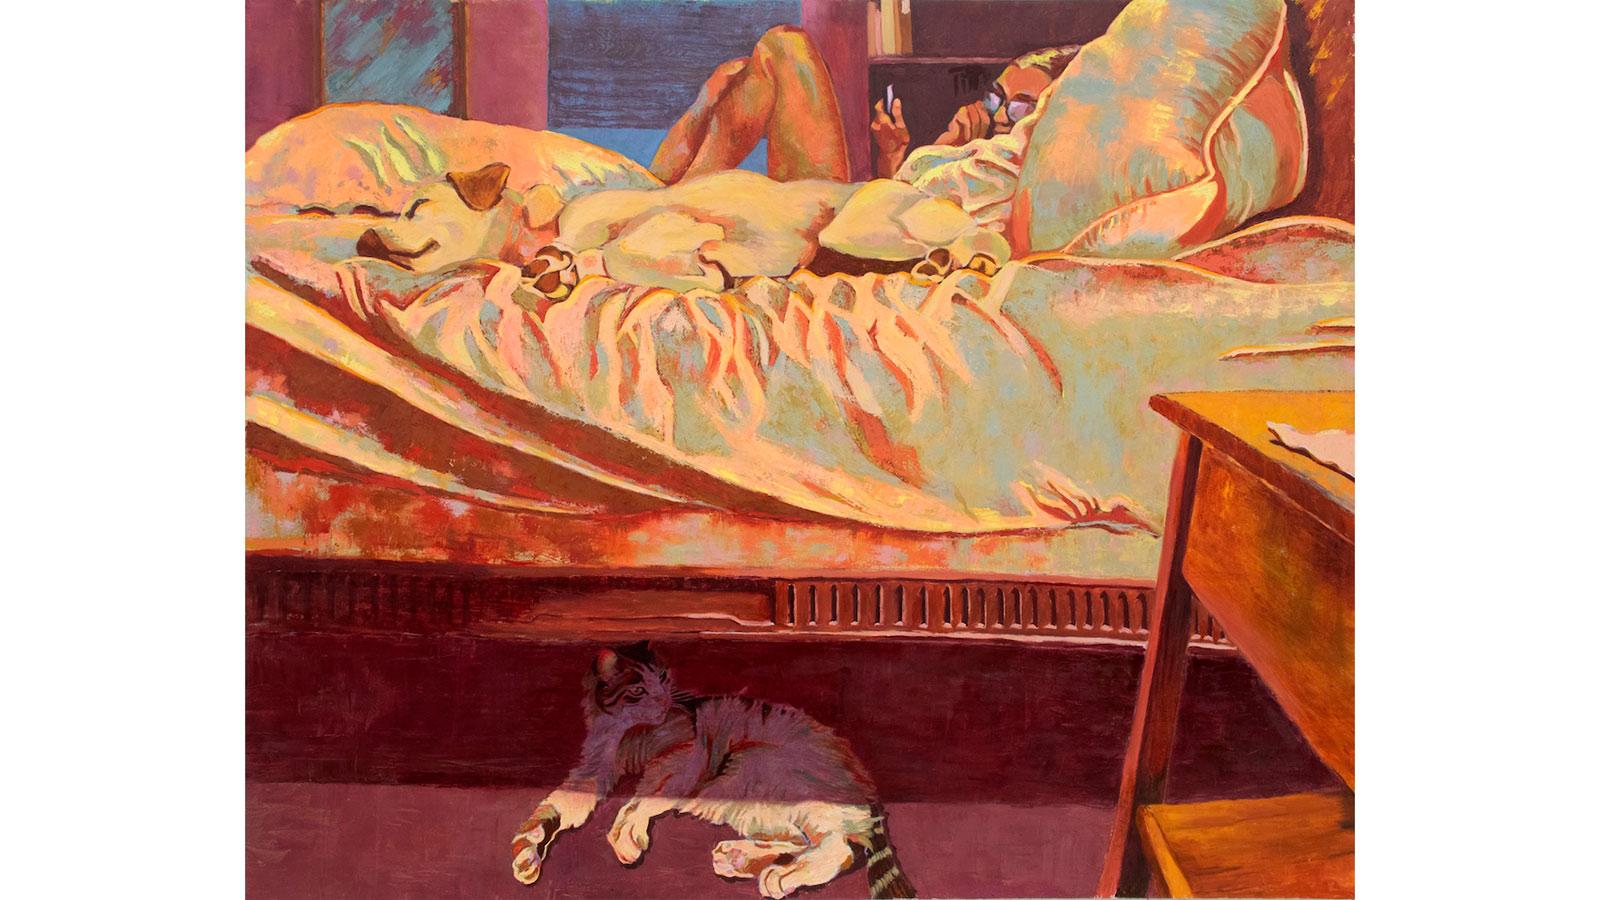 Painting of a person and dog on a bed with a cat below called Twilight Time by Margaret Zox Brown displayed in the We're Home exhibition in the Pace University Art Gallery.